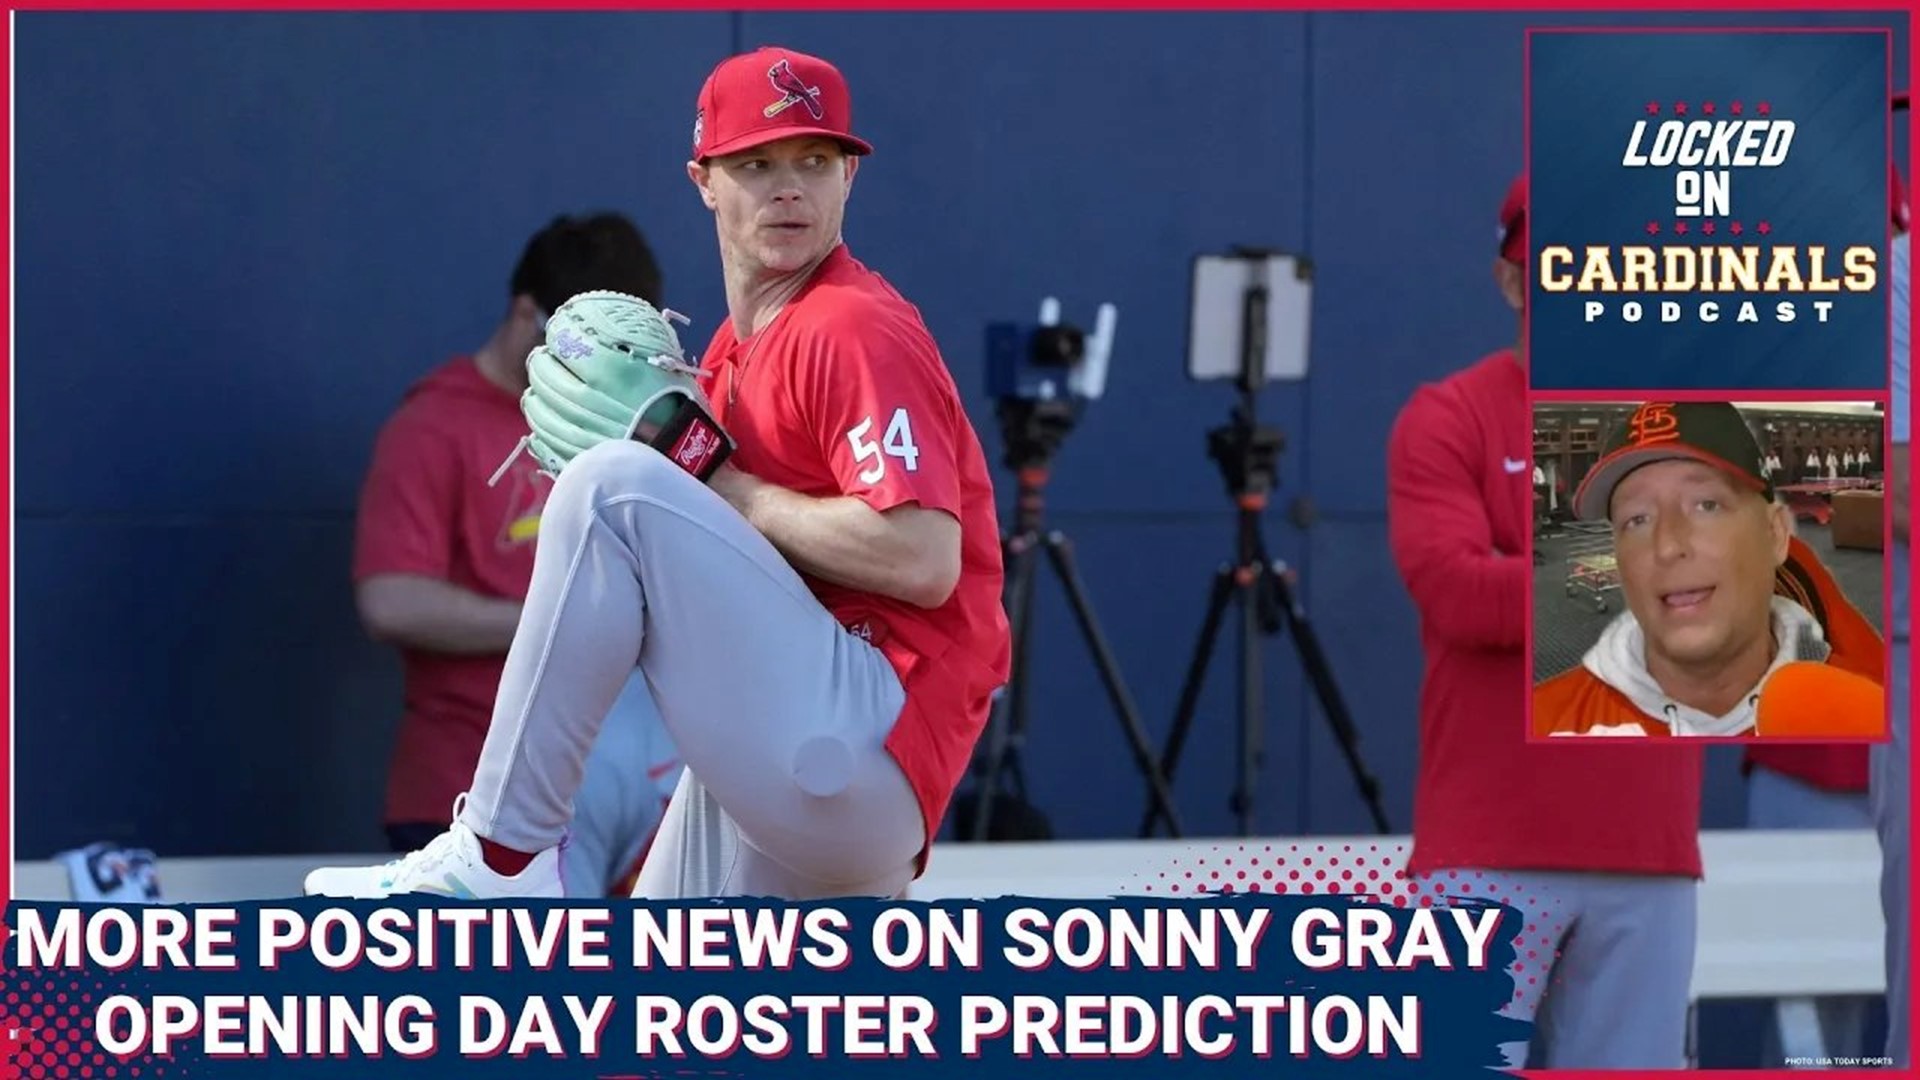 Injury Updates On Sonny Gray And Brandon Crawford, Opening Day Roster And Blake Snell Signs!